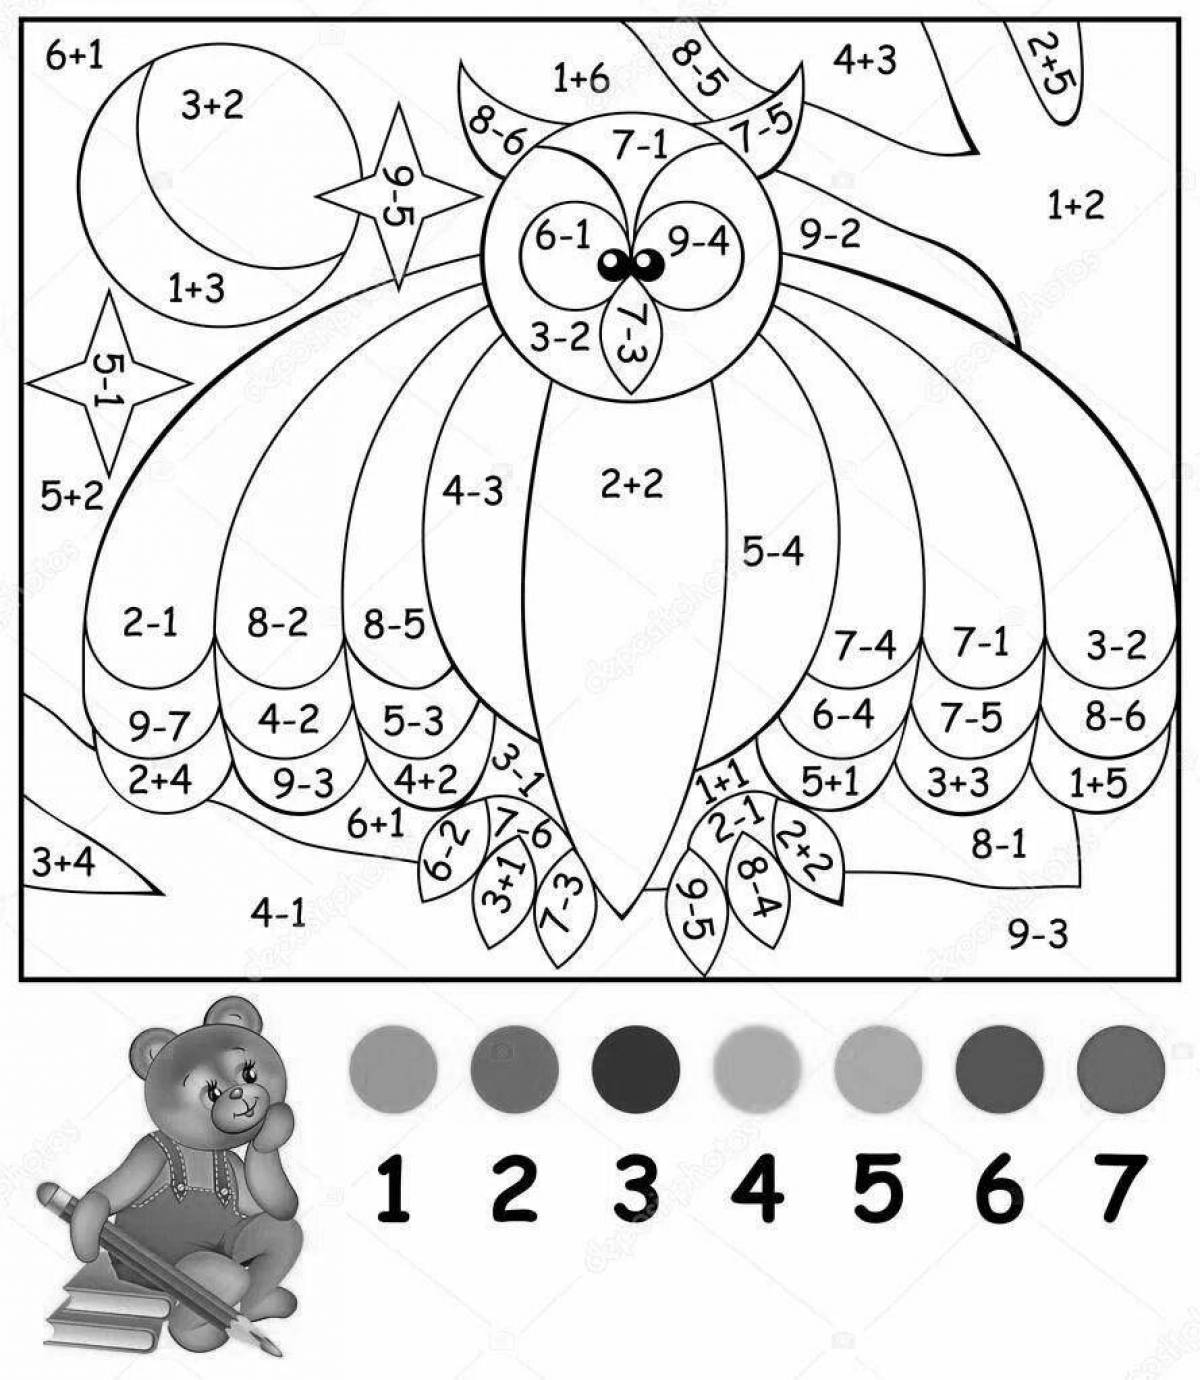 Fun examples of coloring pages for preschoolers